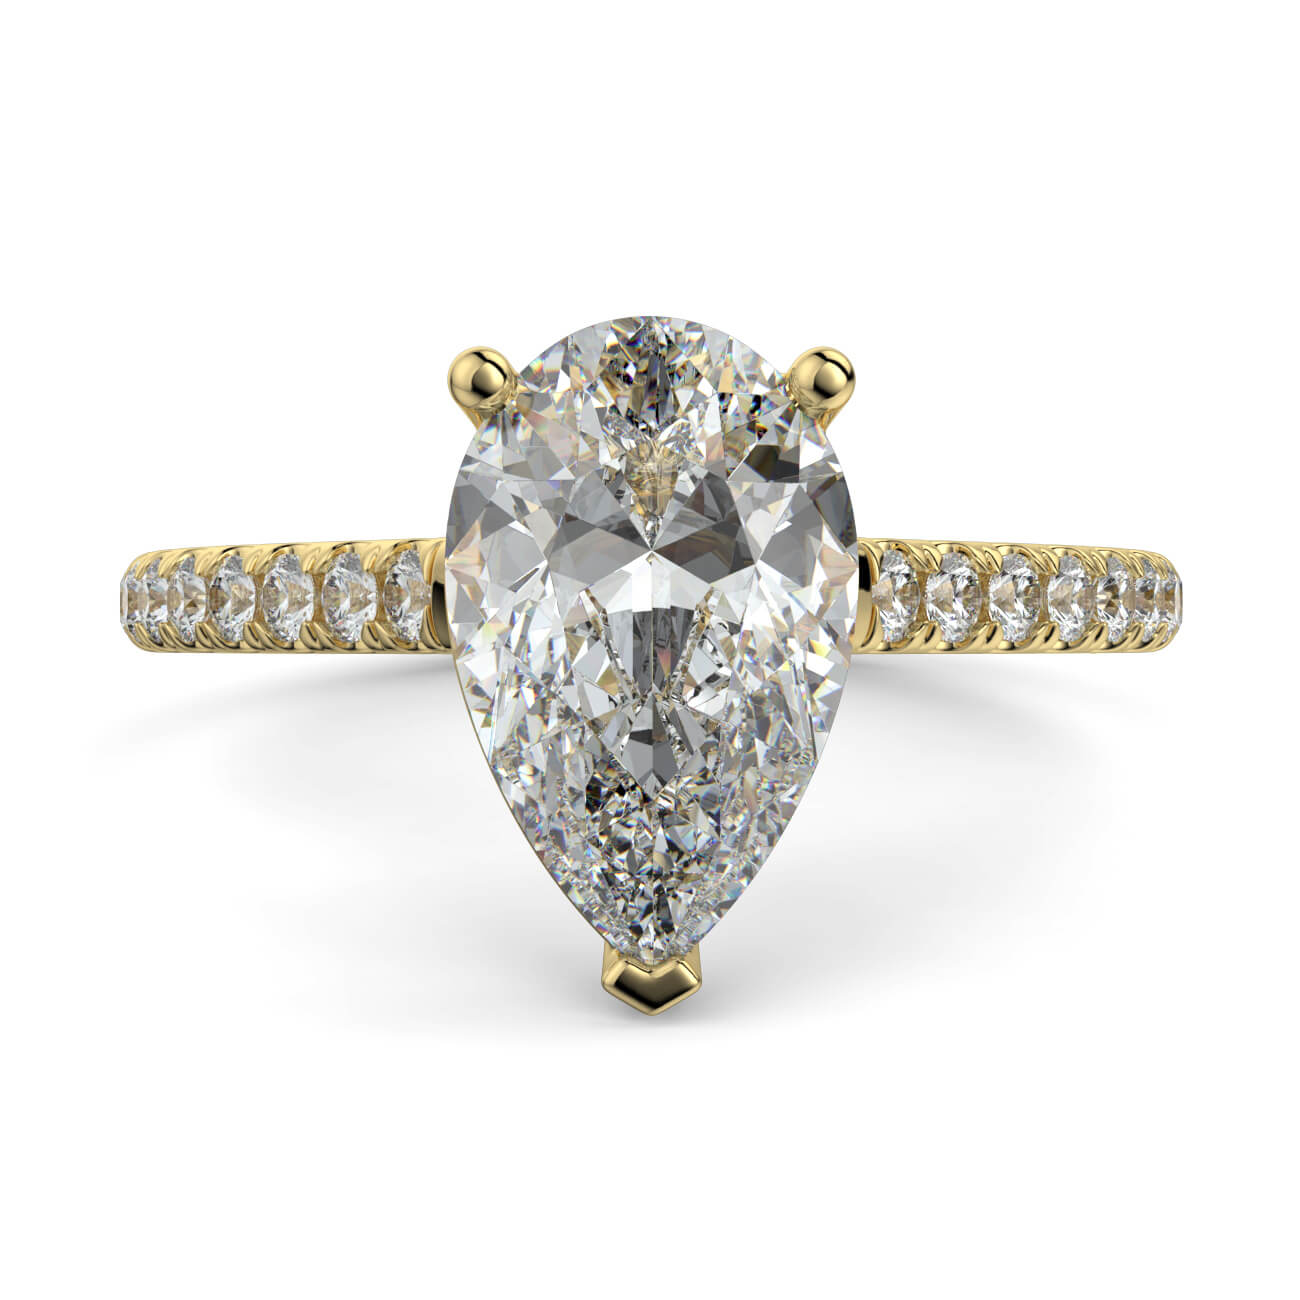 Pear shape diamond cathedral engagement ring in yellow gold – Australian Diamond Network